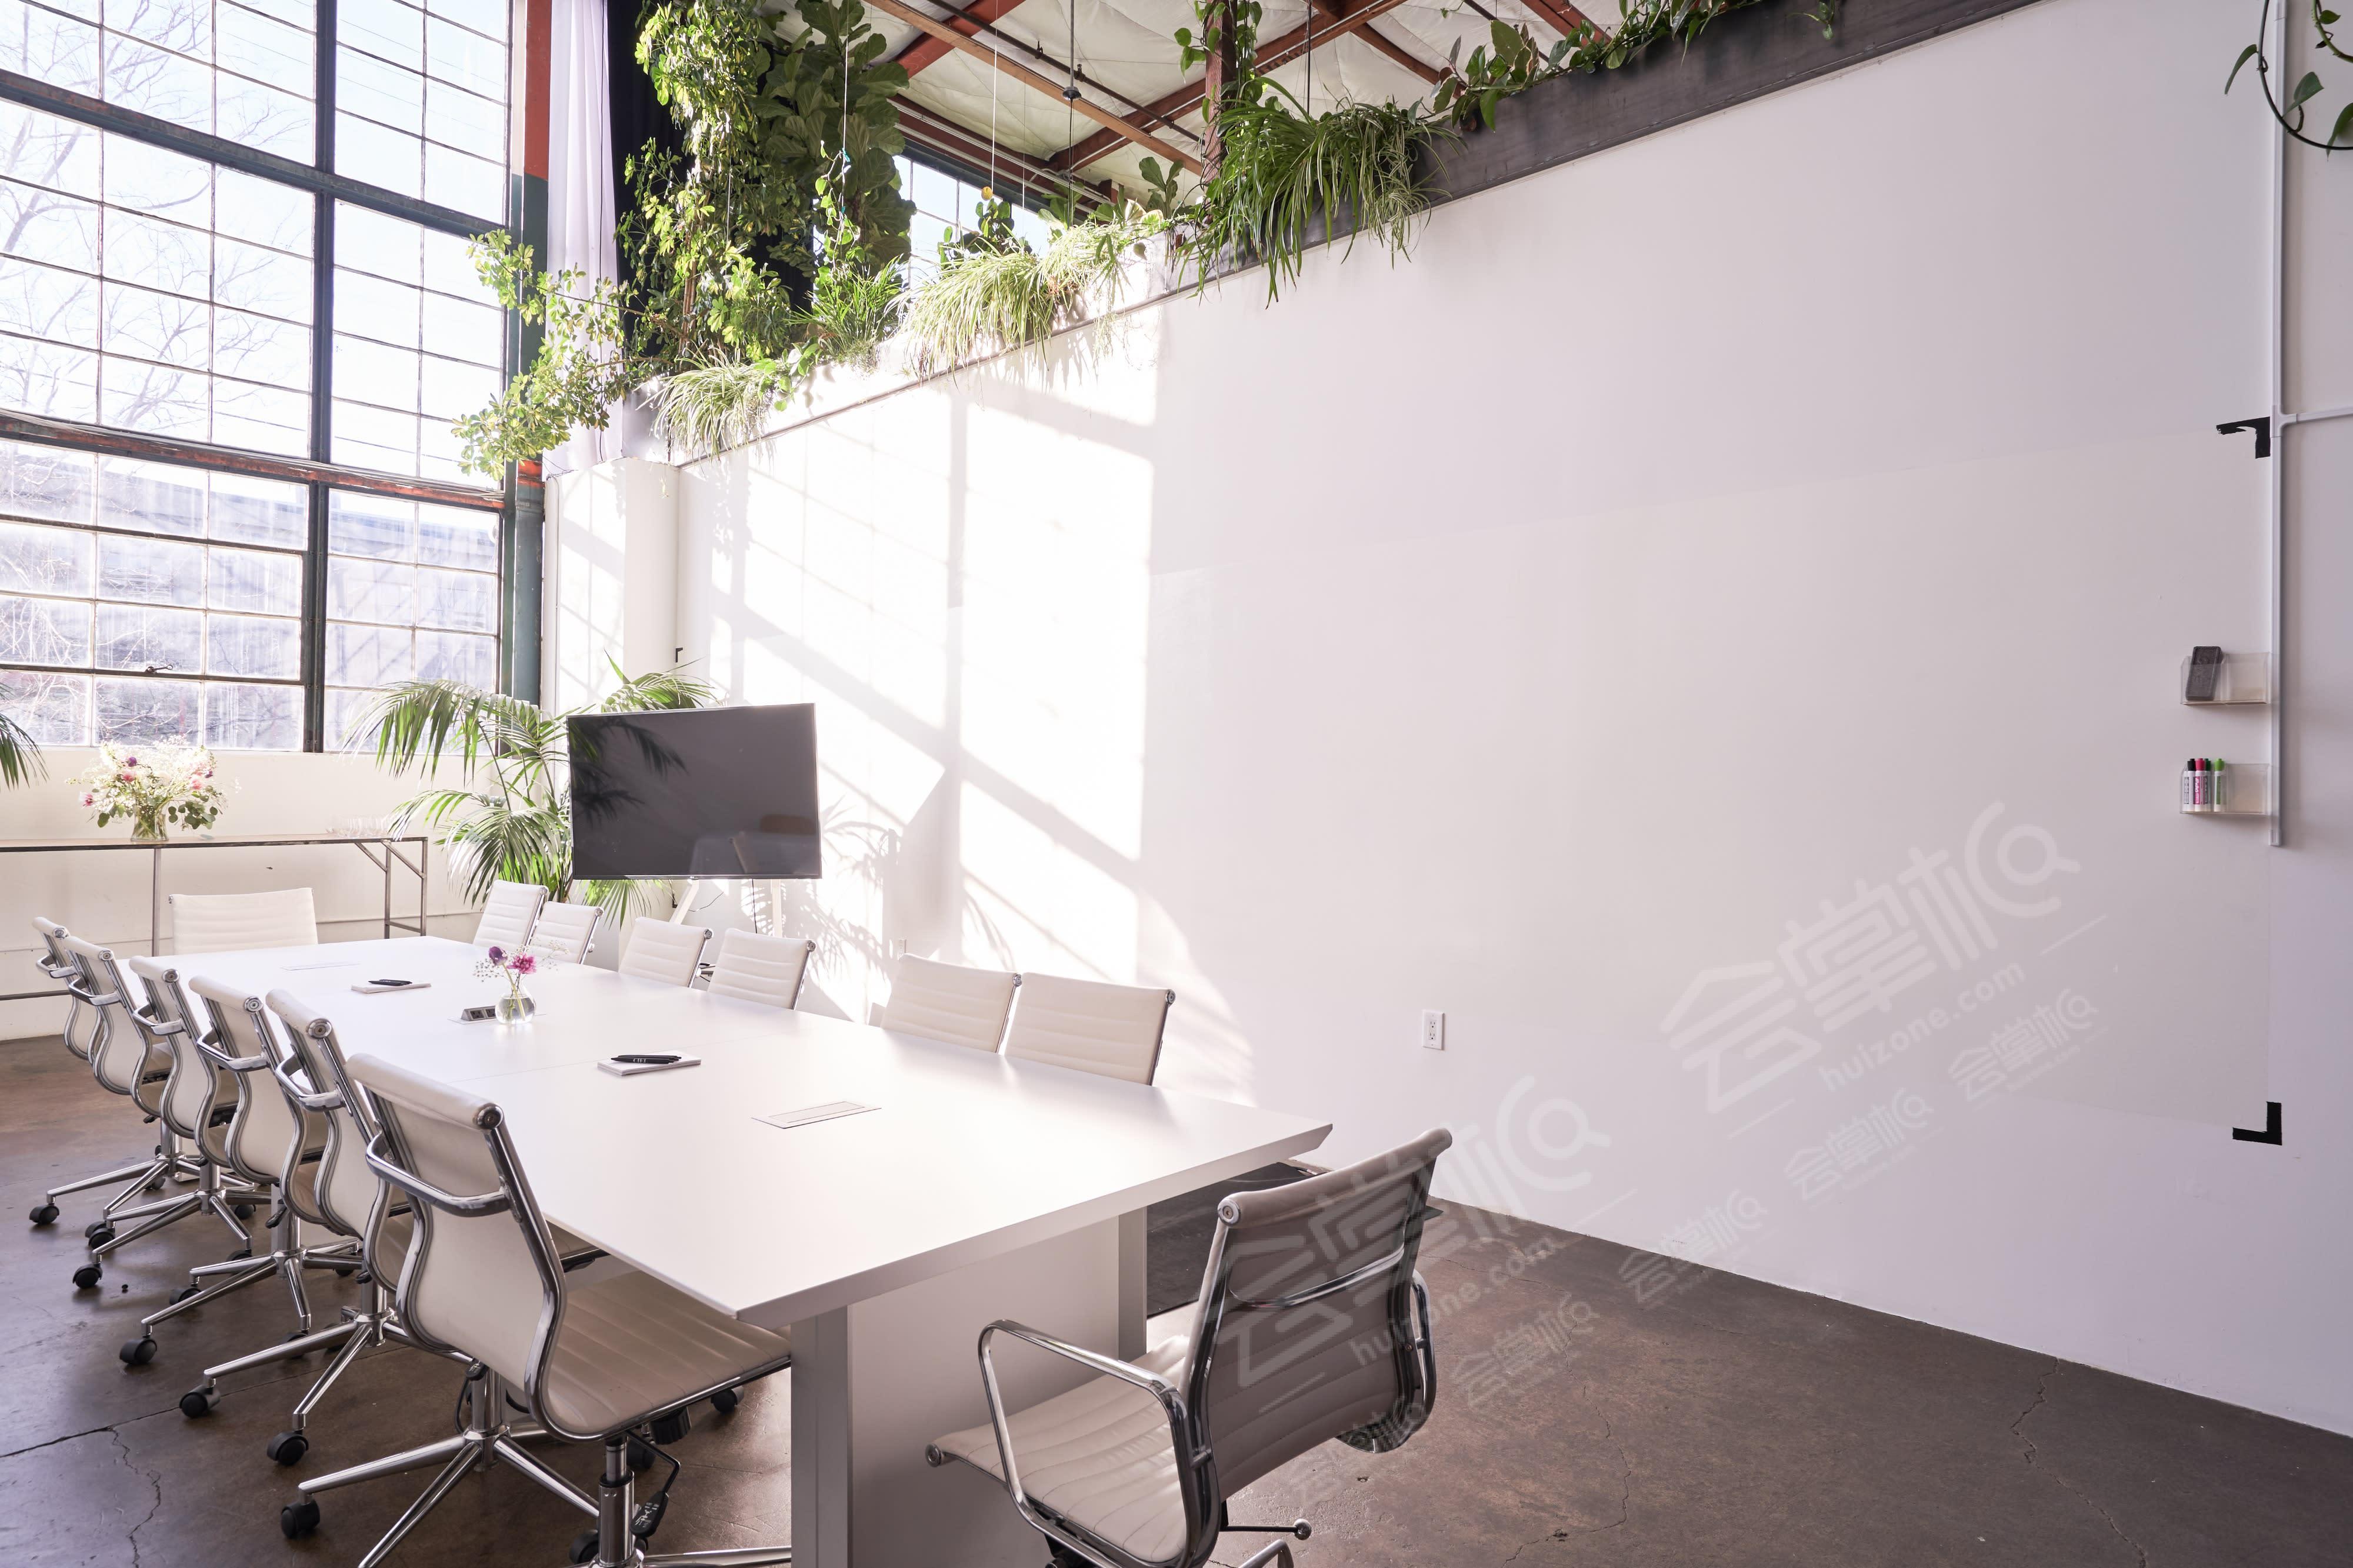 Ciel Le Noir: Plant Filled Conference Room, Industrial Chic Meeting Space